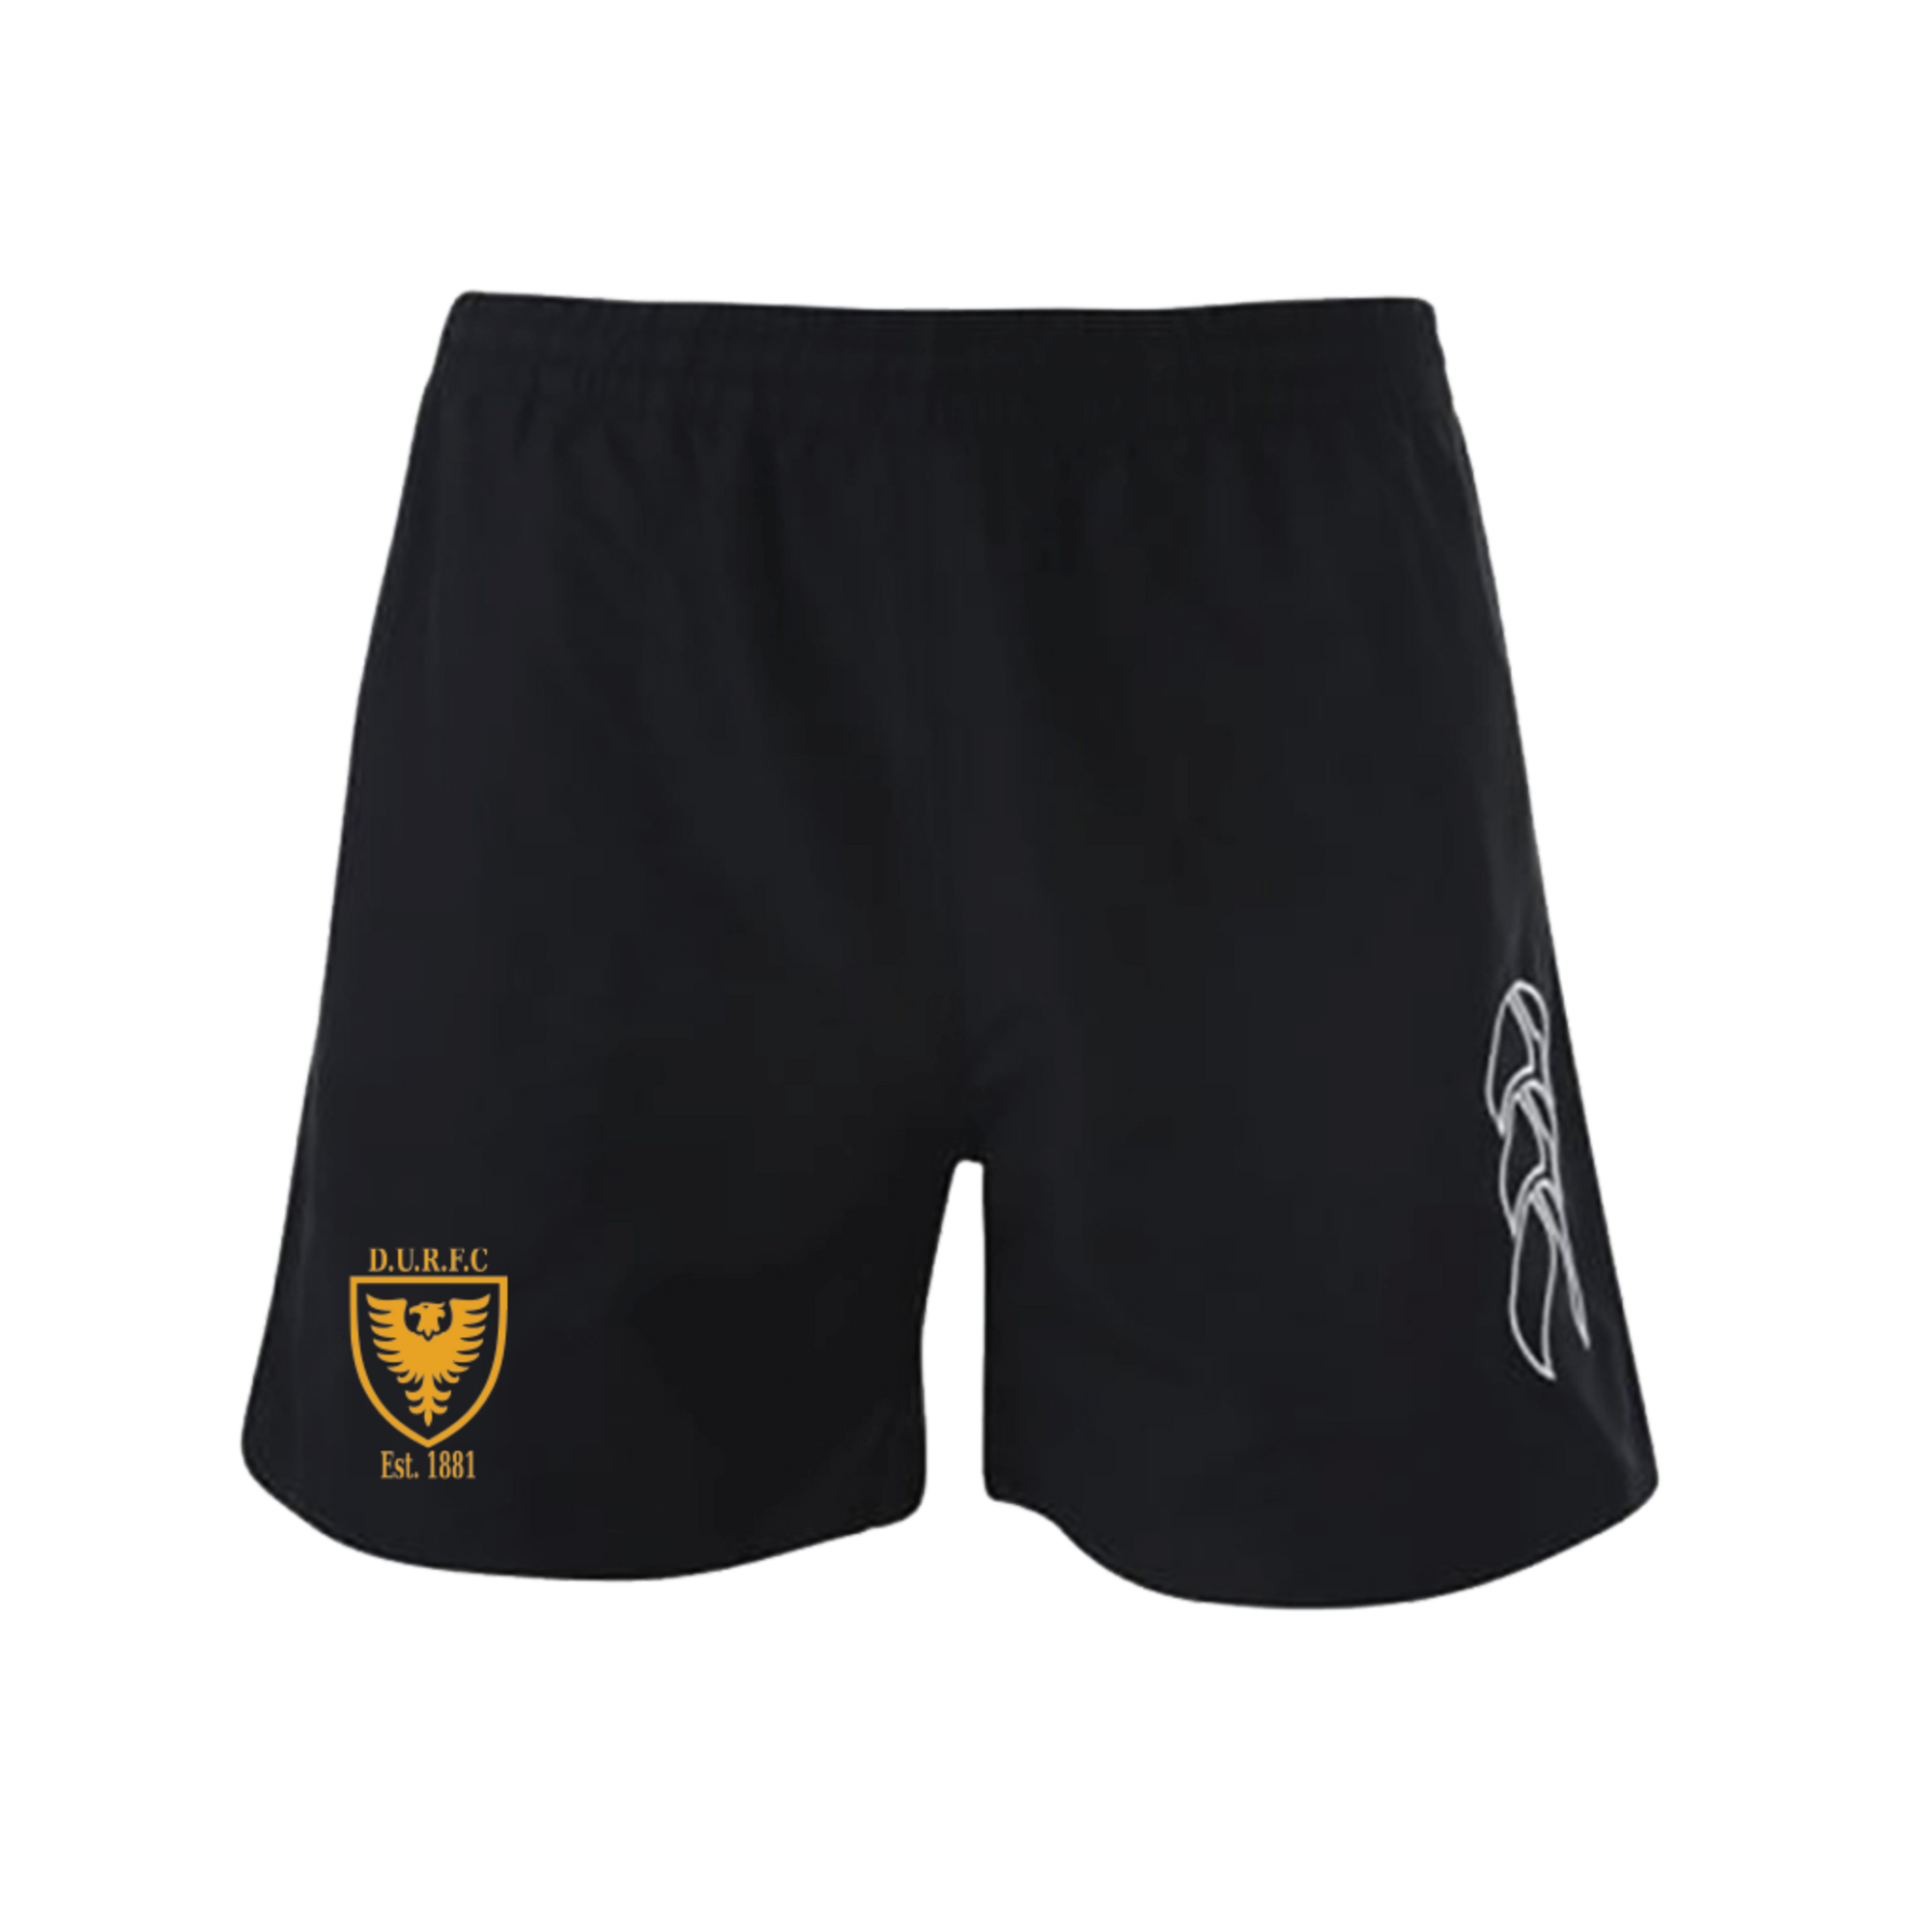 DURFC CCC Tactic Shorts - www.therugbyshop.com www.therugbyshop.com MENS / BLACK / XS TRS Distribution Canada SHORTS DURFC CCC Tactic Shorts